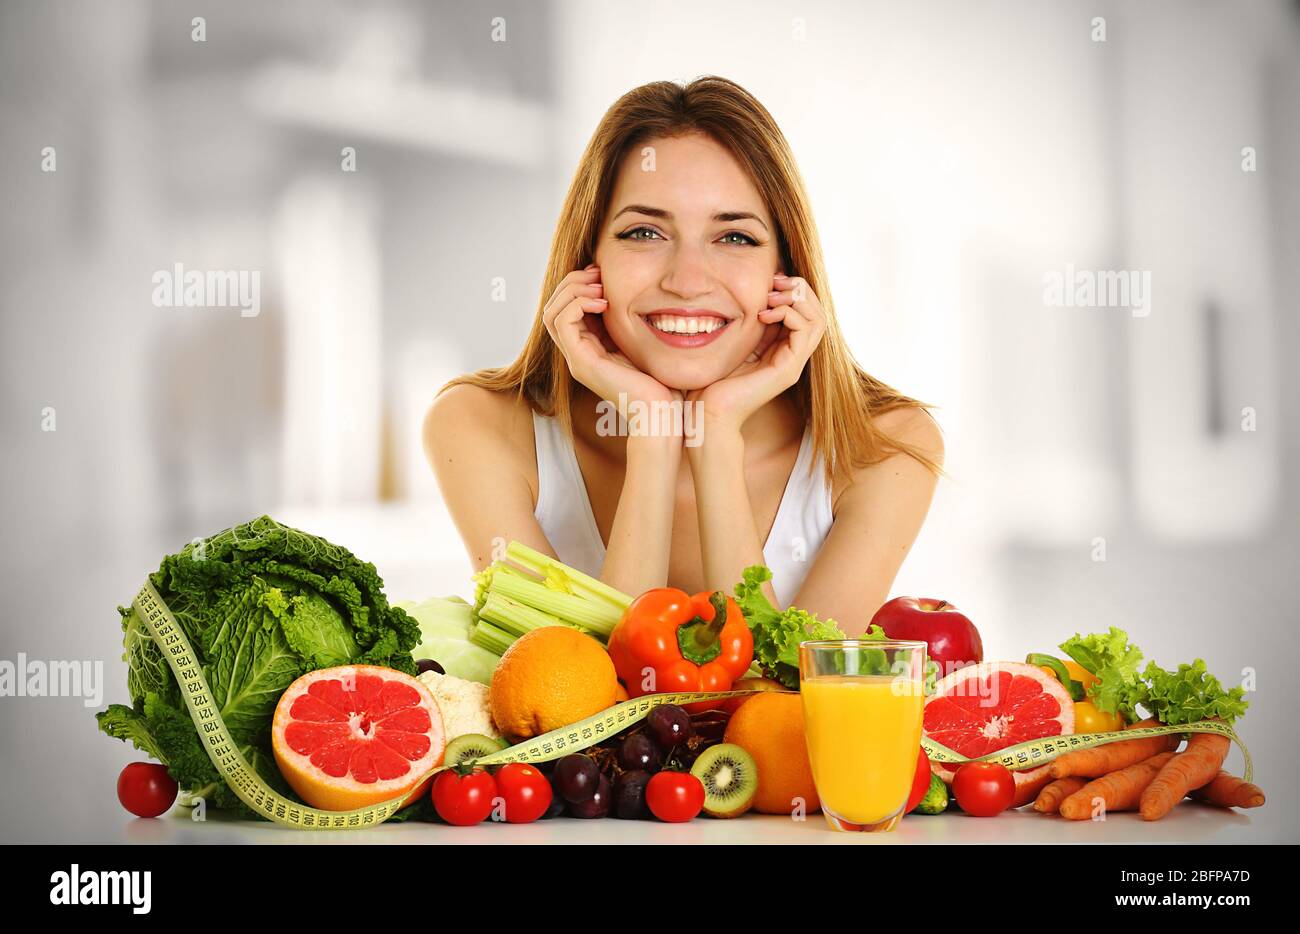 Beautiful young woman with healthy food on blurred kitchen background. Diet concept. Stock Photo